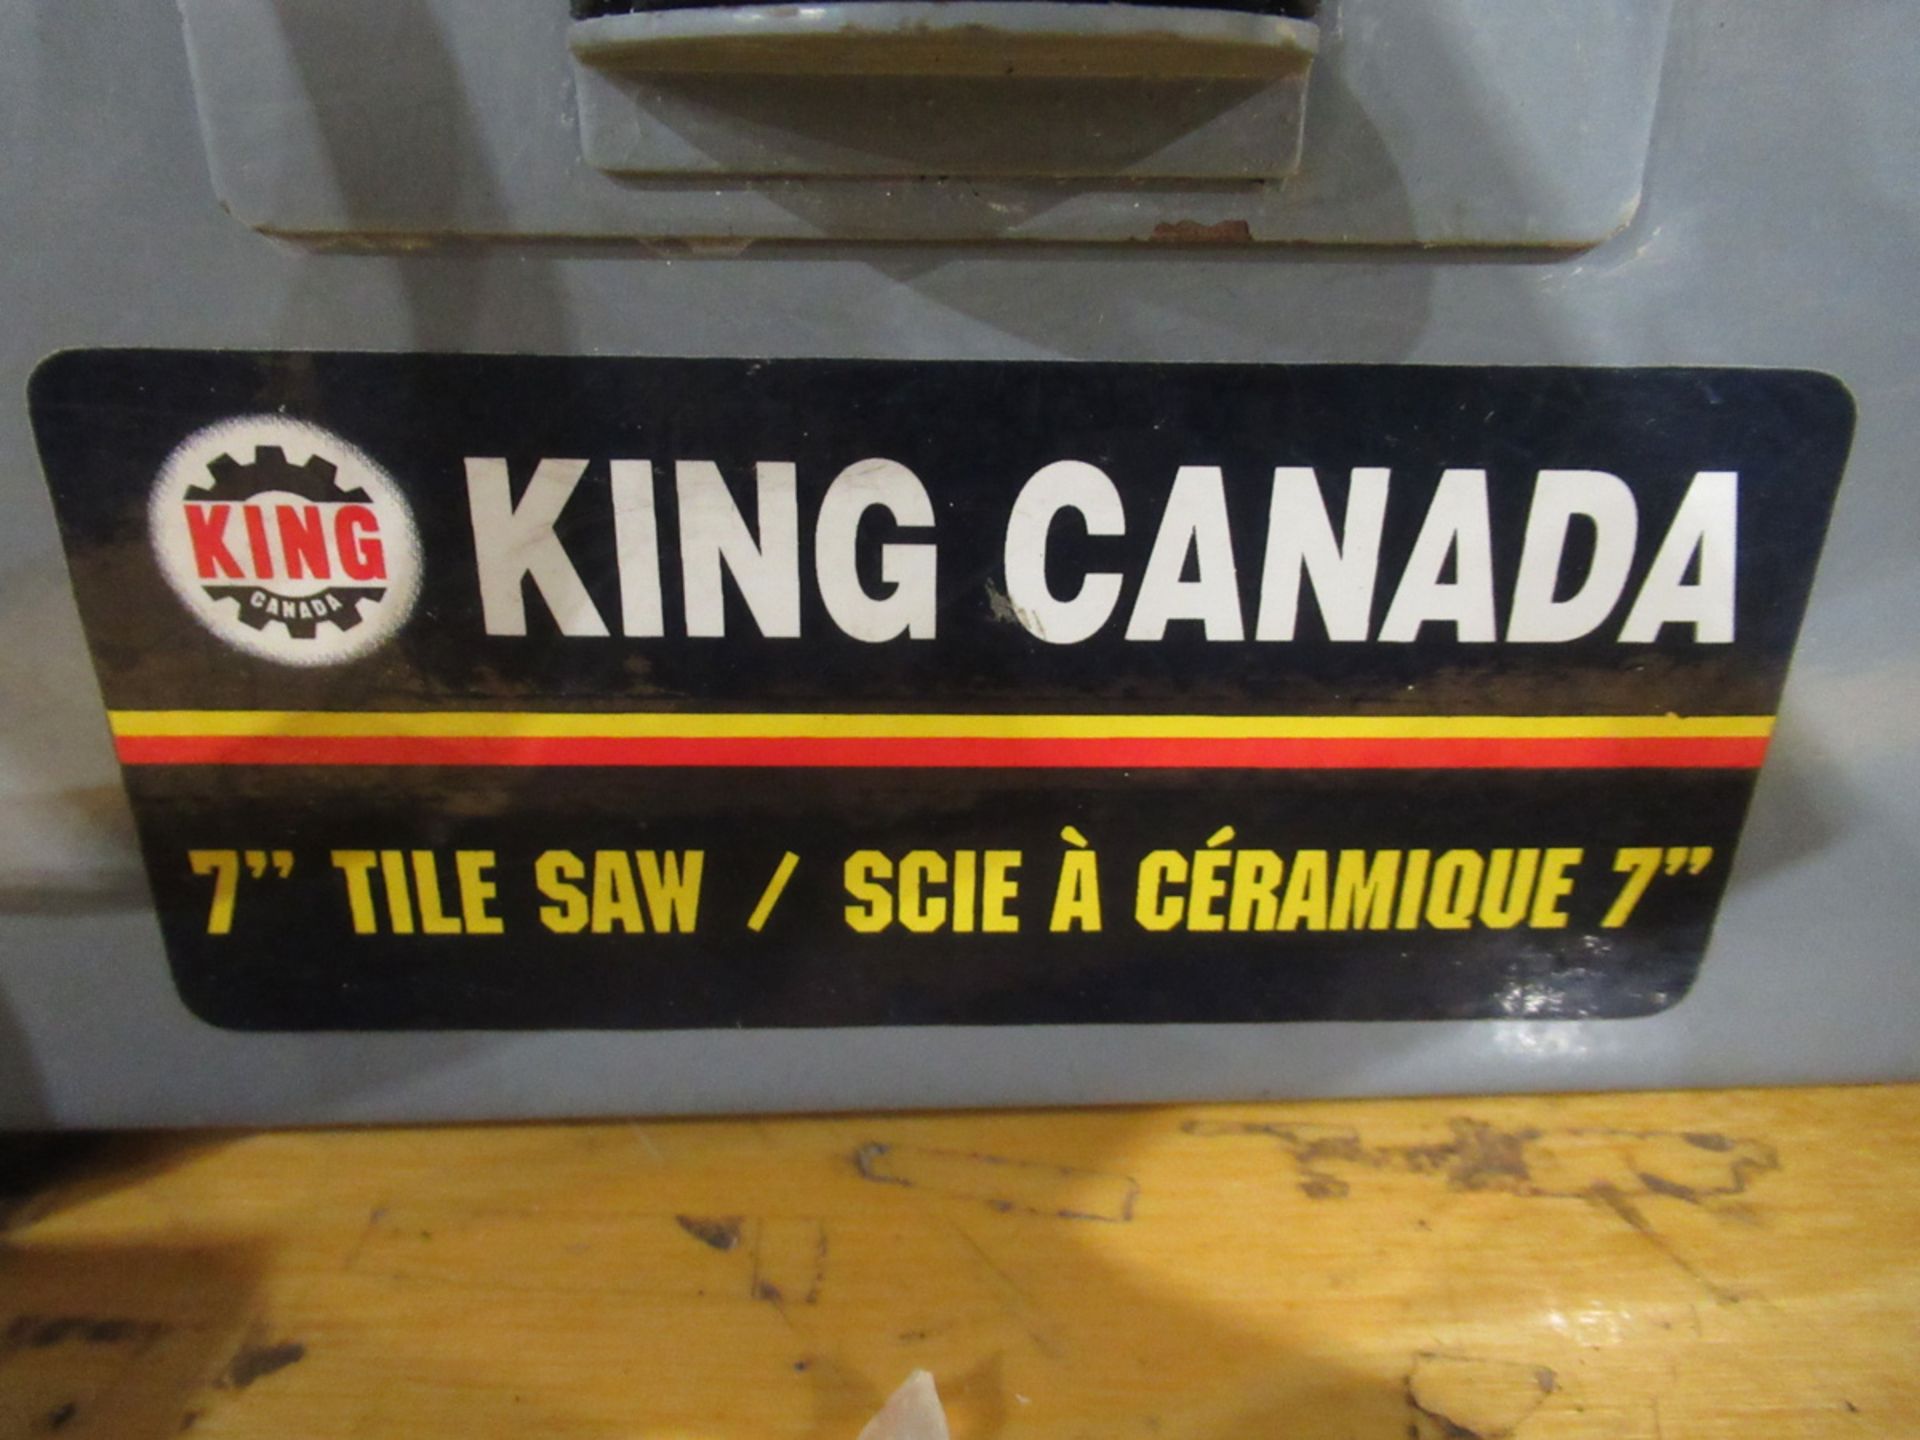 KING CANADA WET CERAMIC SAW 7" - Image 2 of 3